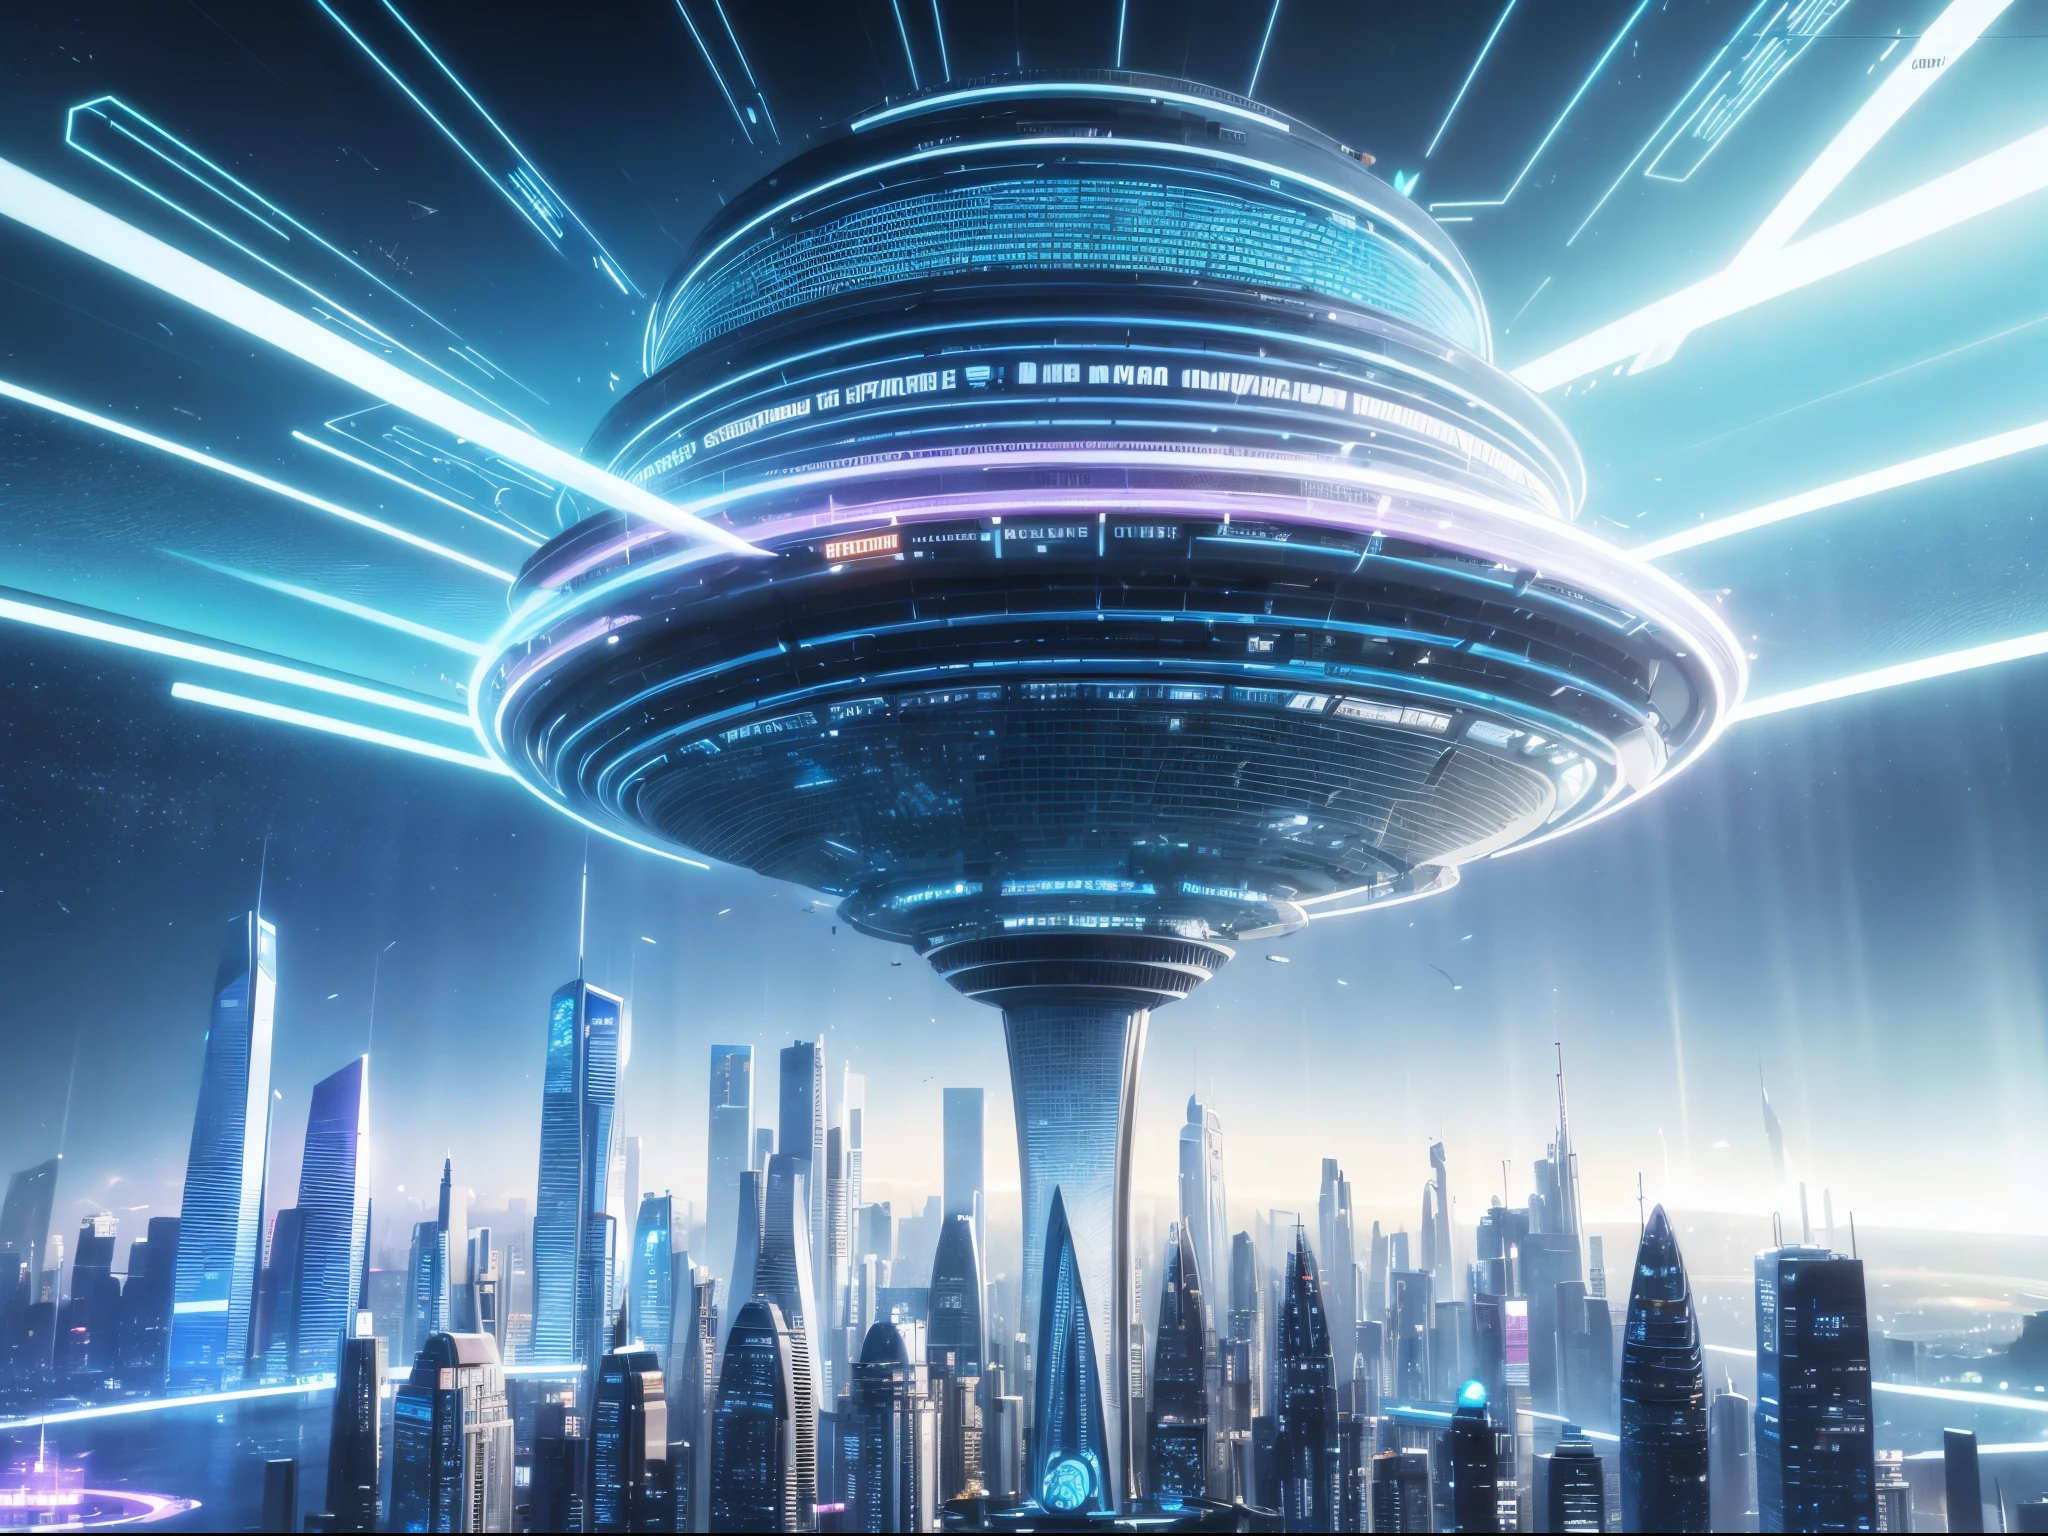 Visualize a futuristic cityscape where AI-generated music emanates from towering crystalline structures, creating a symphony of light and sound reminiscent of sci-fi artist Syd Mead's vibrant landscapes. enormous 